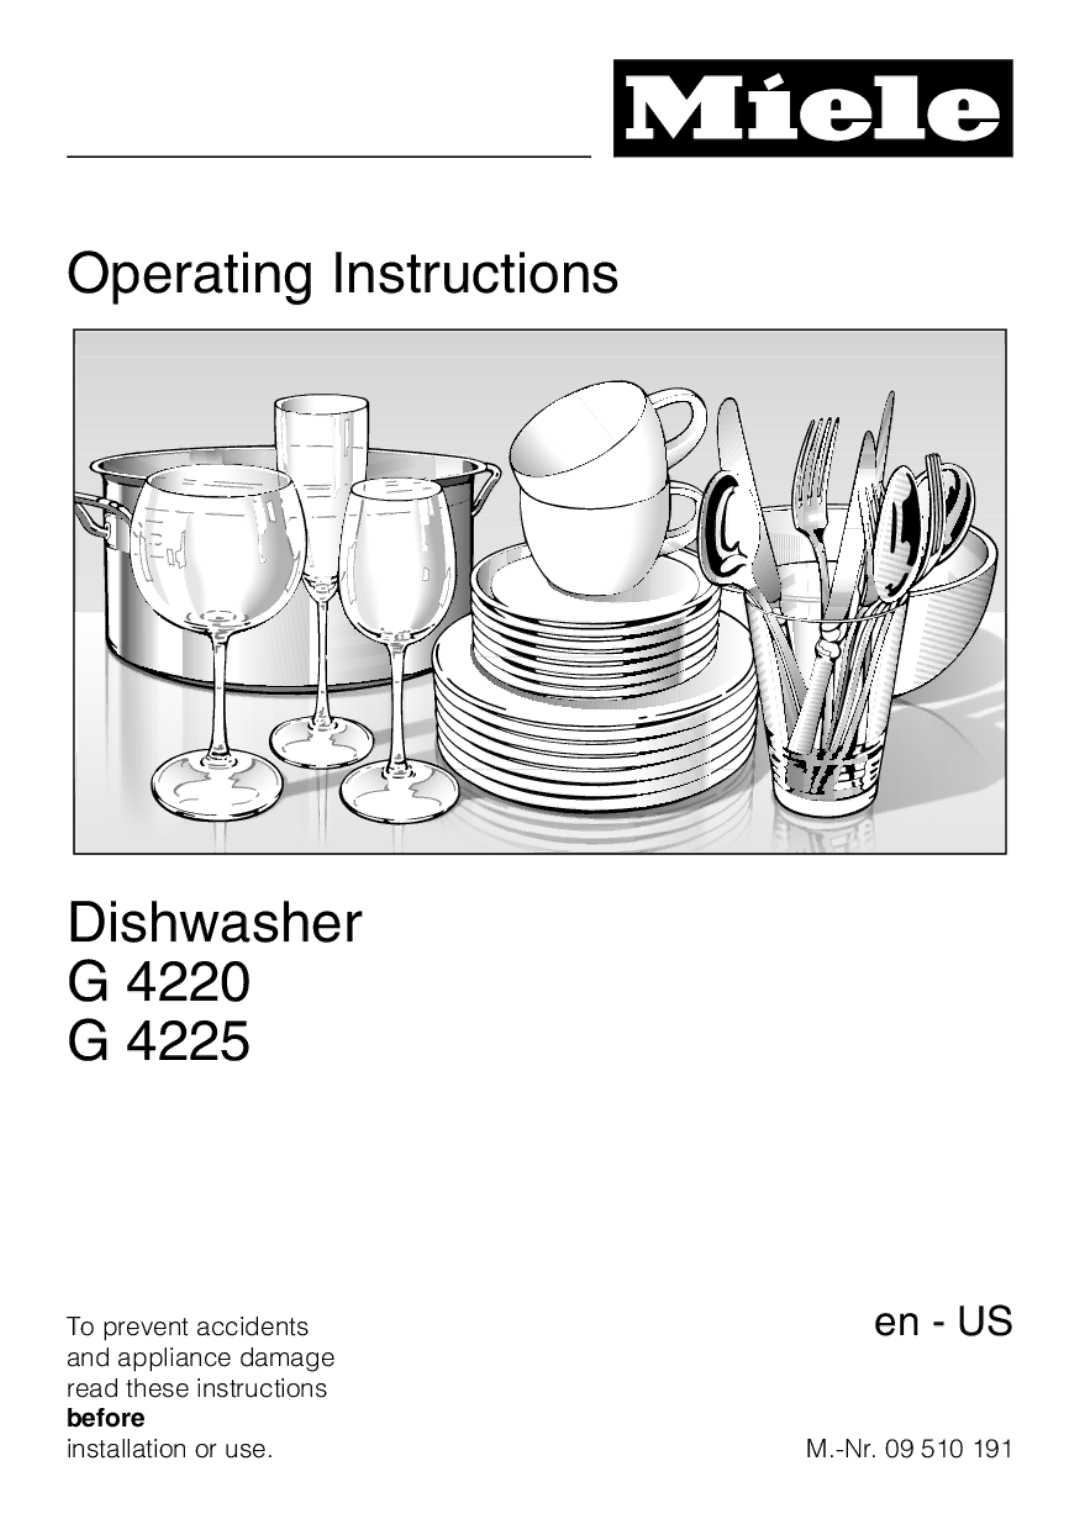 Miele G 4220, G 4225 operating instructions Operating Instructions Dishwasher 4220 G, Before 